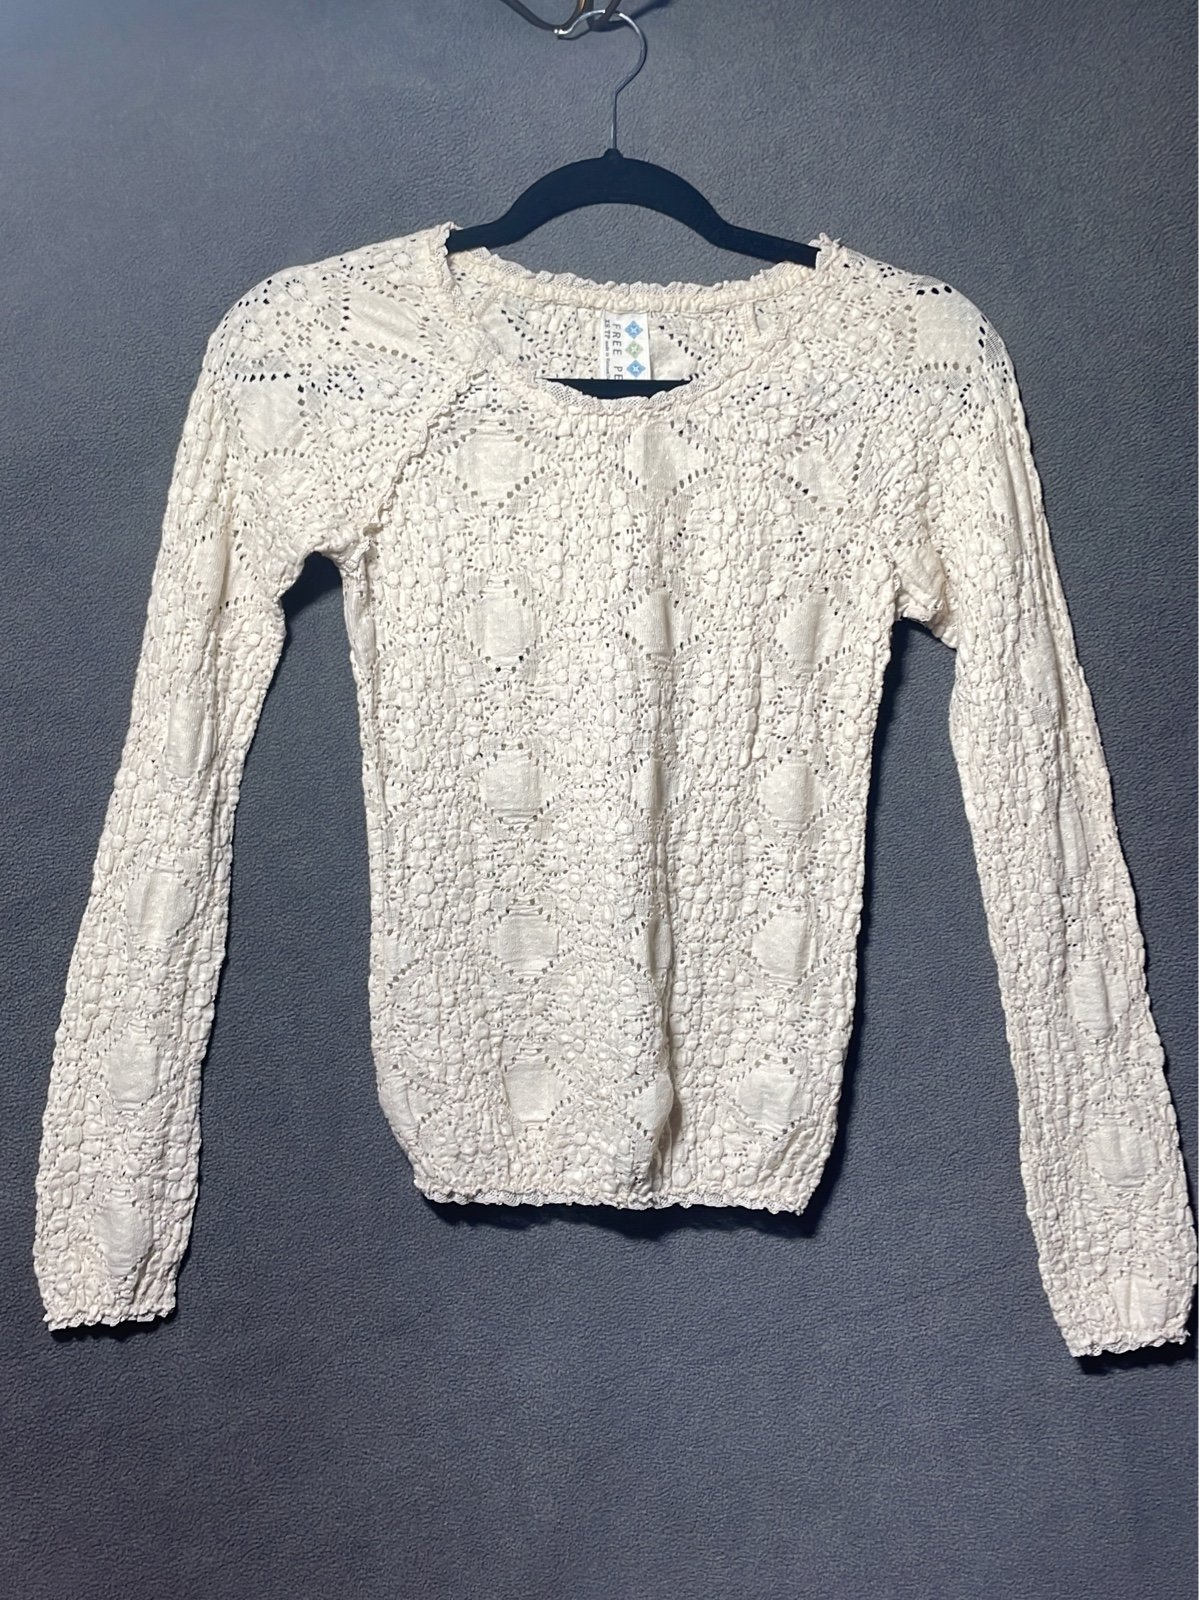 large selection Brand new Free People LS lace top oJeNc